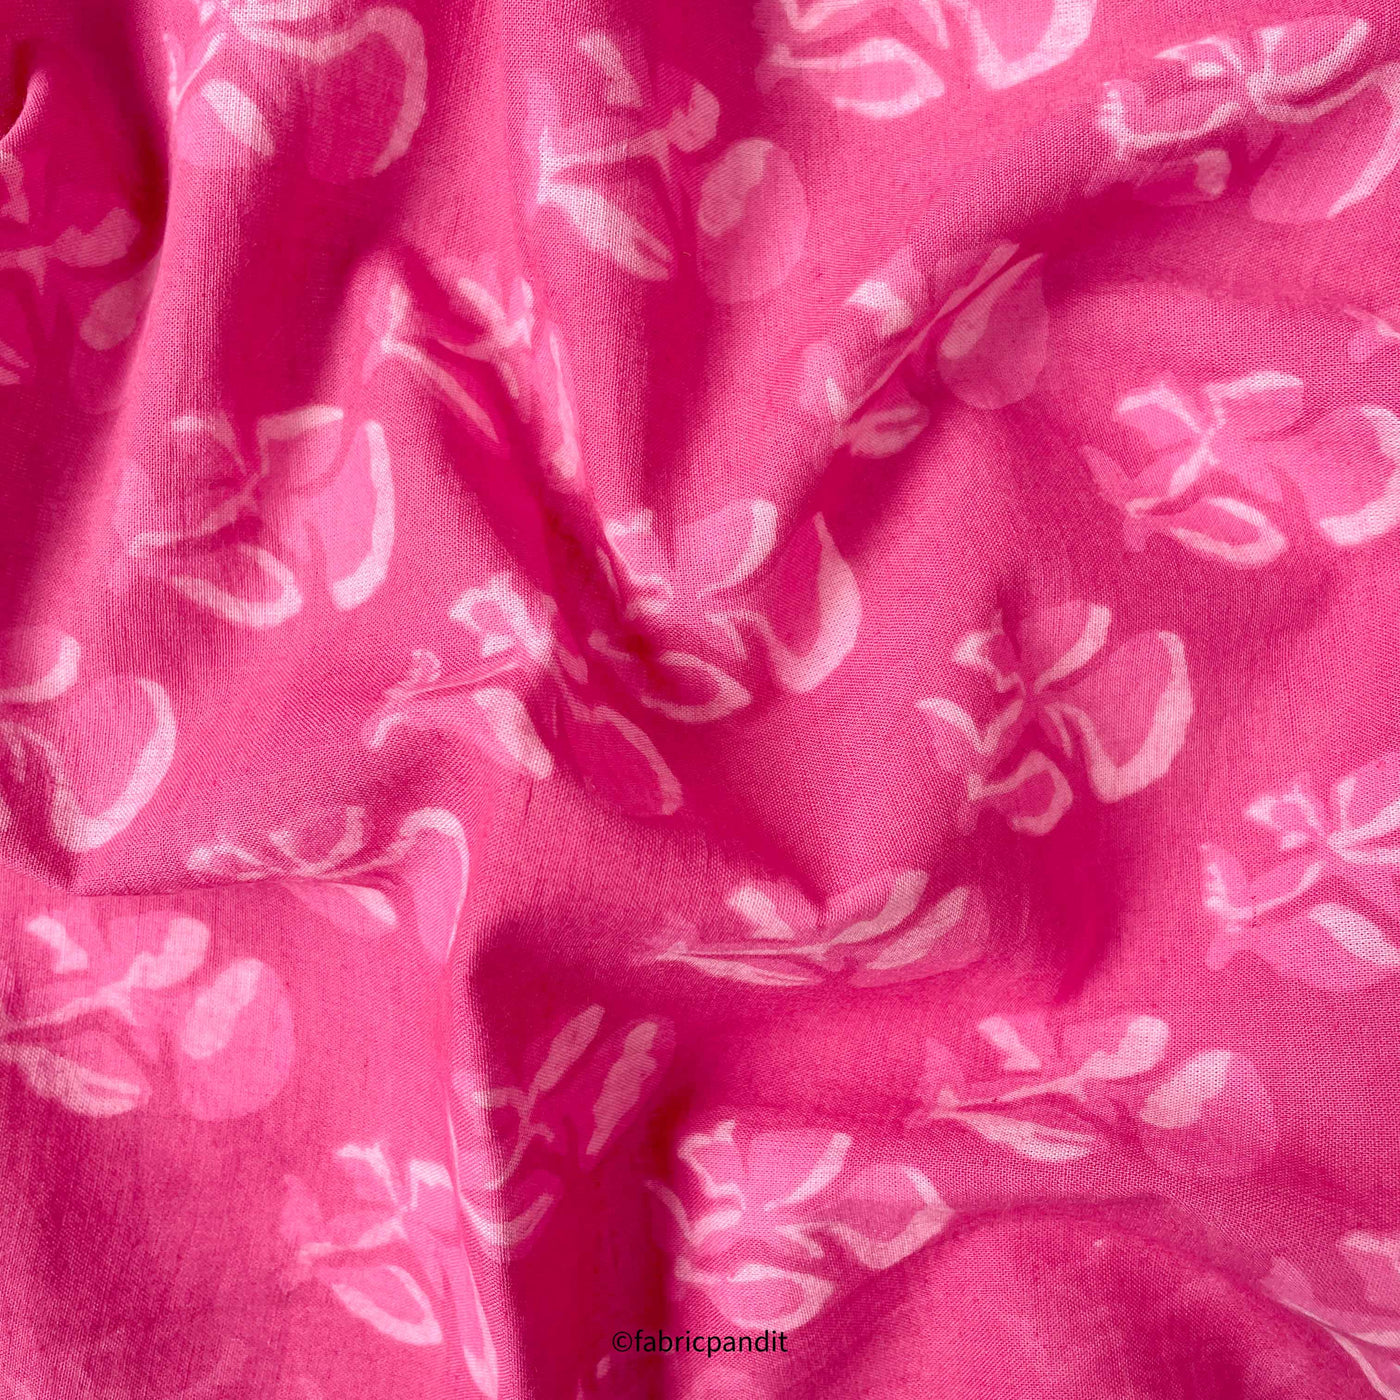 Hand Block Printed Cotton Fabric Cut Piece (CUT PIECE) Hot Pink Abstract Tulips Hand Block Printed Pure Cotton Fabric (Width 42 inches)